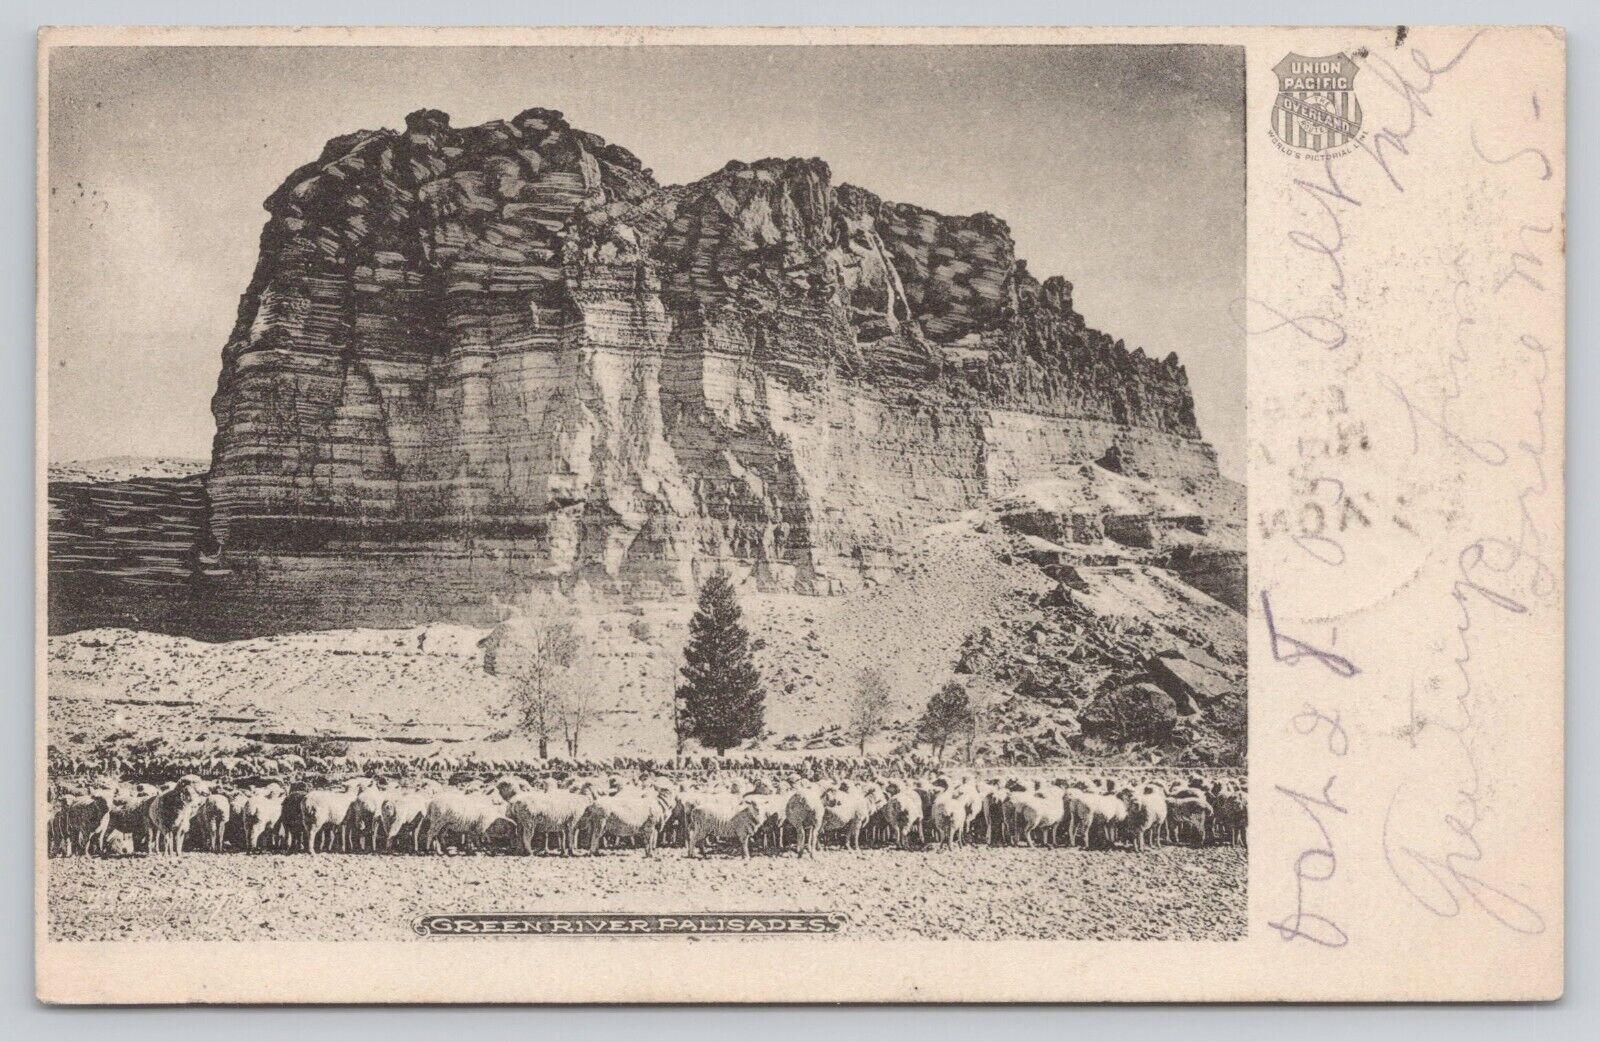 1905 Green River Palisades WY Sheep Herd Union Pacific Overland Route Postcard